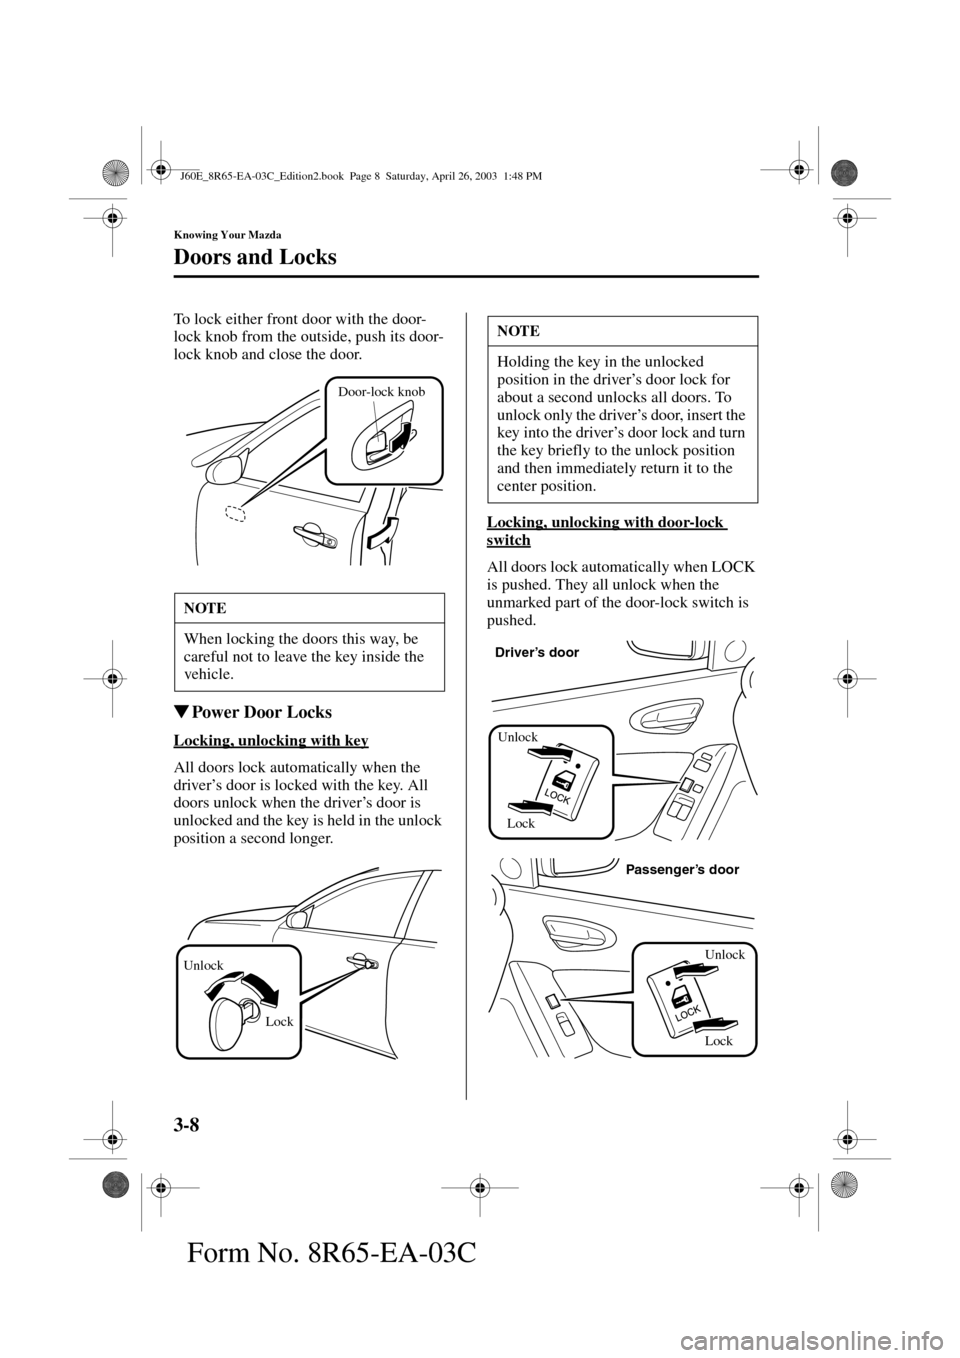 MAZDA MODEL RX 8 2004  Owners Manual (in English) 3-8
Knowing Your Mazda
Doors and Locks
Form No. 8R65-EA-03C
To lock either front door with the door-
lock knob from the outside, push its door-
lock knob and close the door.
Power Door Locks
Locking,